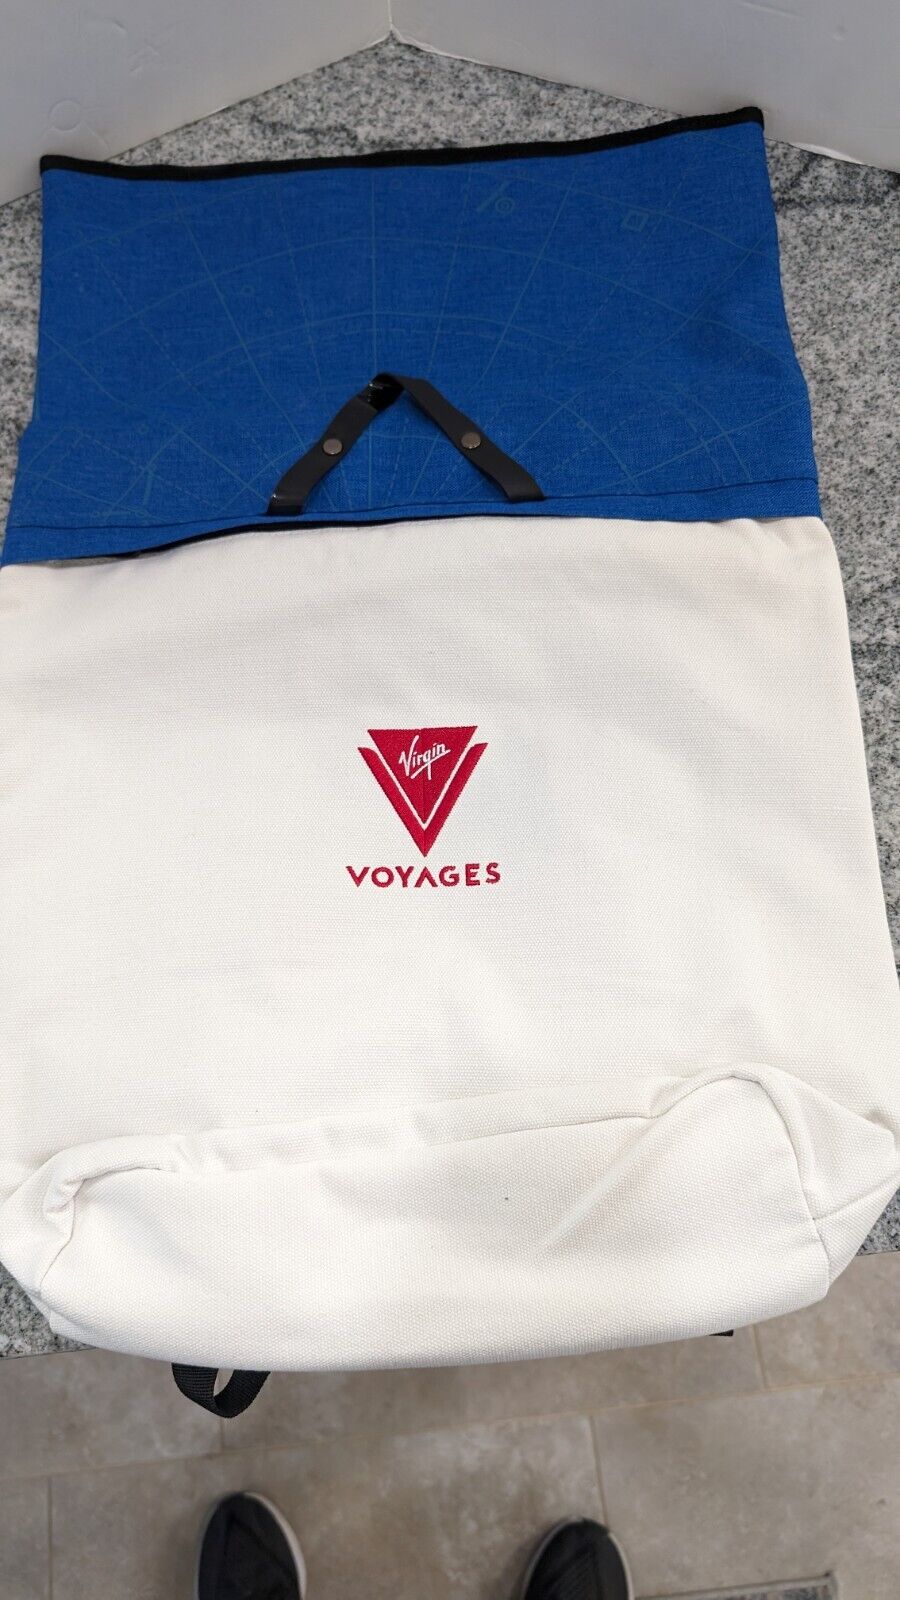 Virgin Voyages Roll-up Backpack NEW w tags, Scarlet Lady first sailings